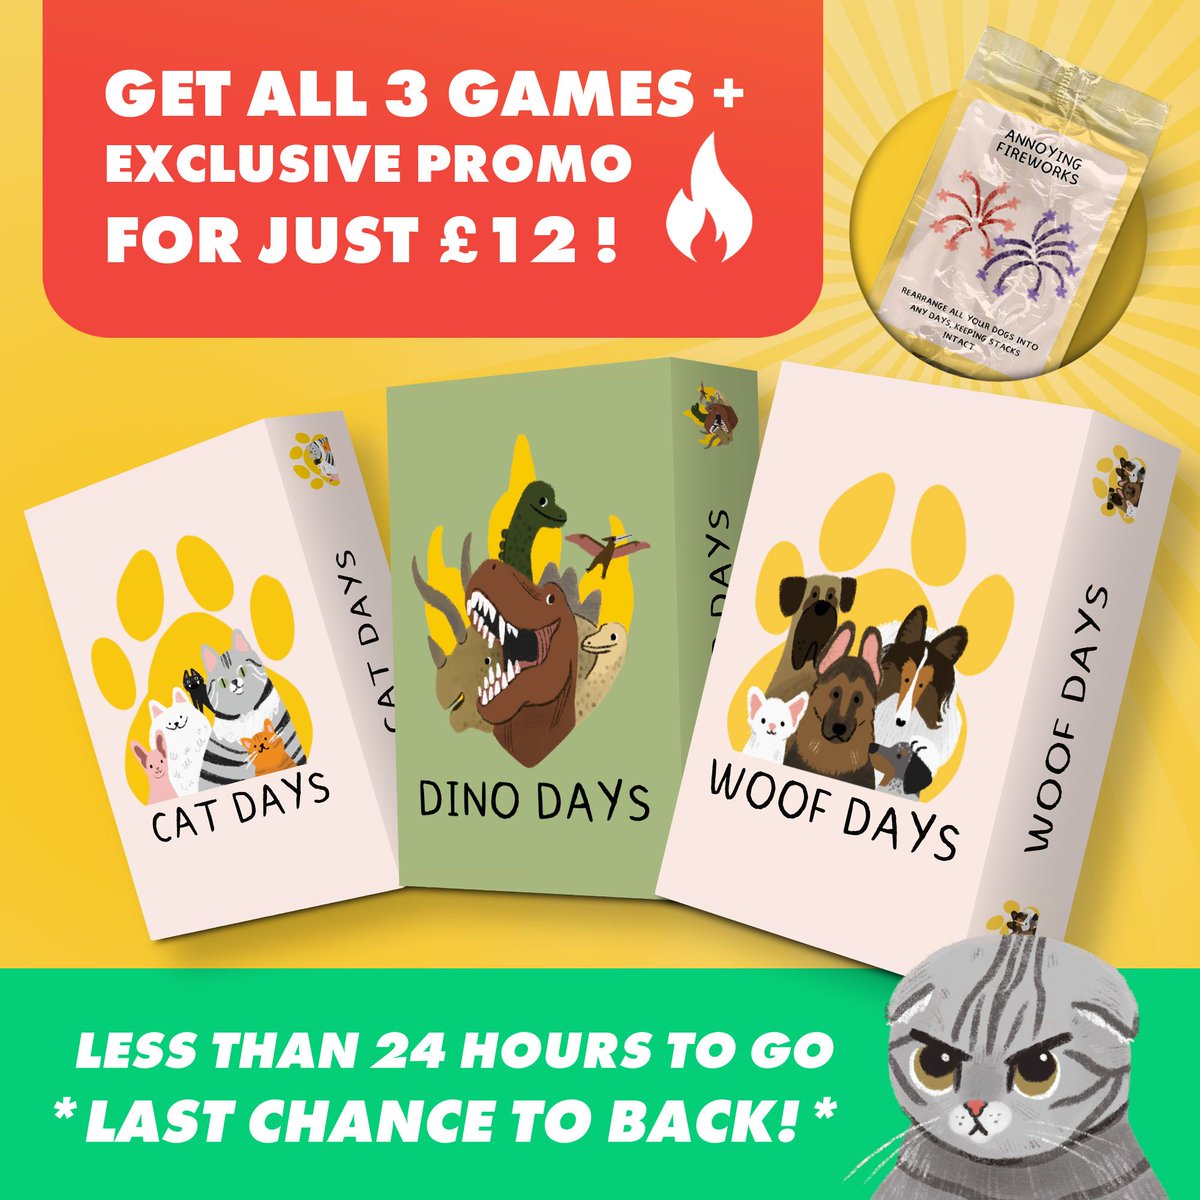 ❗There is less than 24 hours left to back Woof Days on Kickstarter❗ Grab yourself all 3 games today for just £12, including a free Kickstarter Exclusive Promo Card 'Annoying Fireworks'. Pick up your copy here > buff.ly/3VZwDBr #kickstarter #boardgamegeek #zatugames